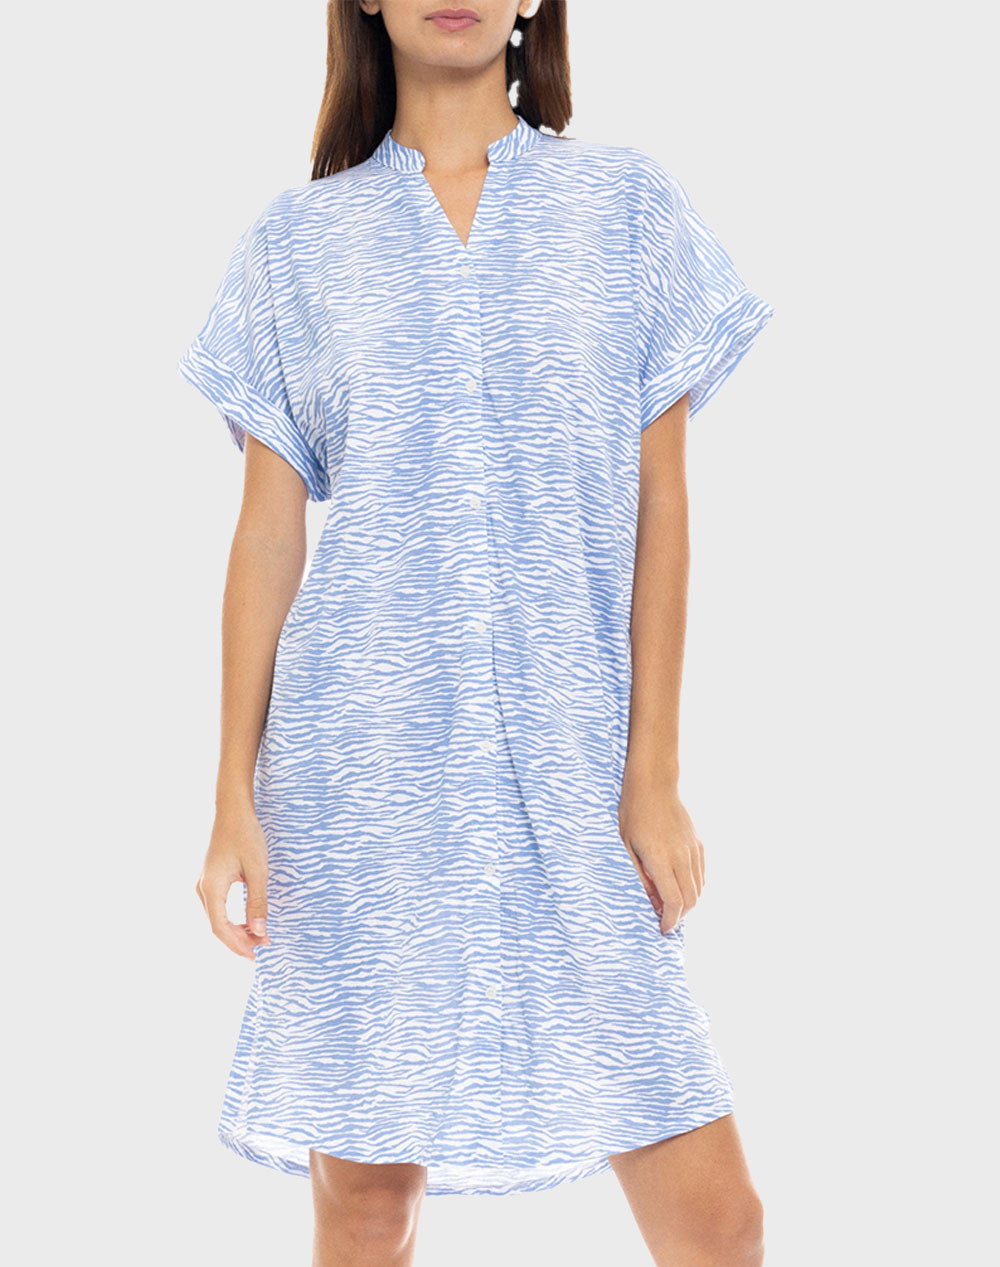 PINK LABEL NIGHTGOWN BLUE LEO